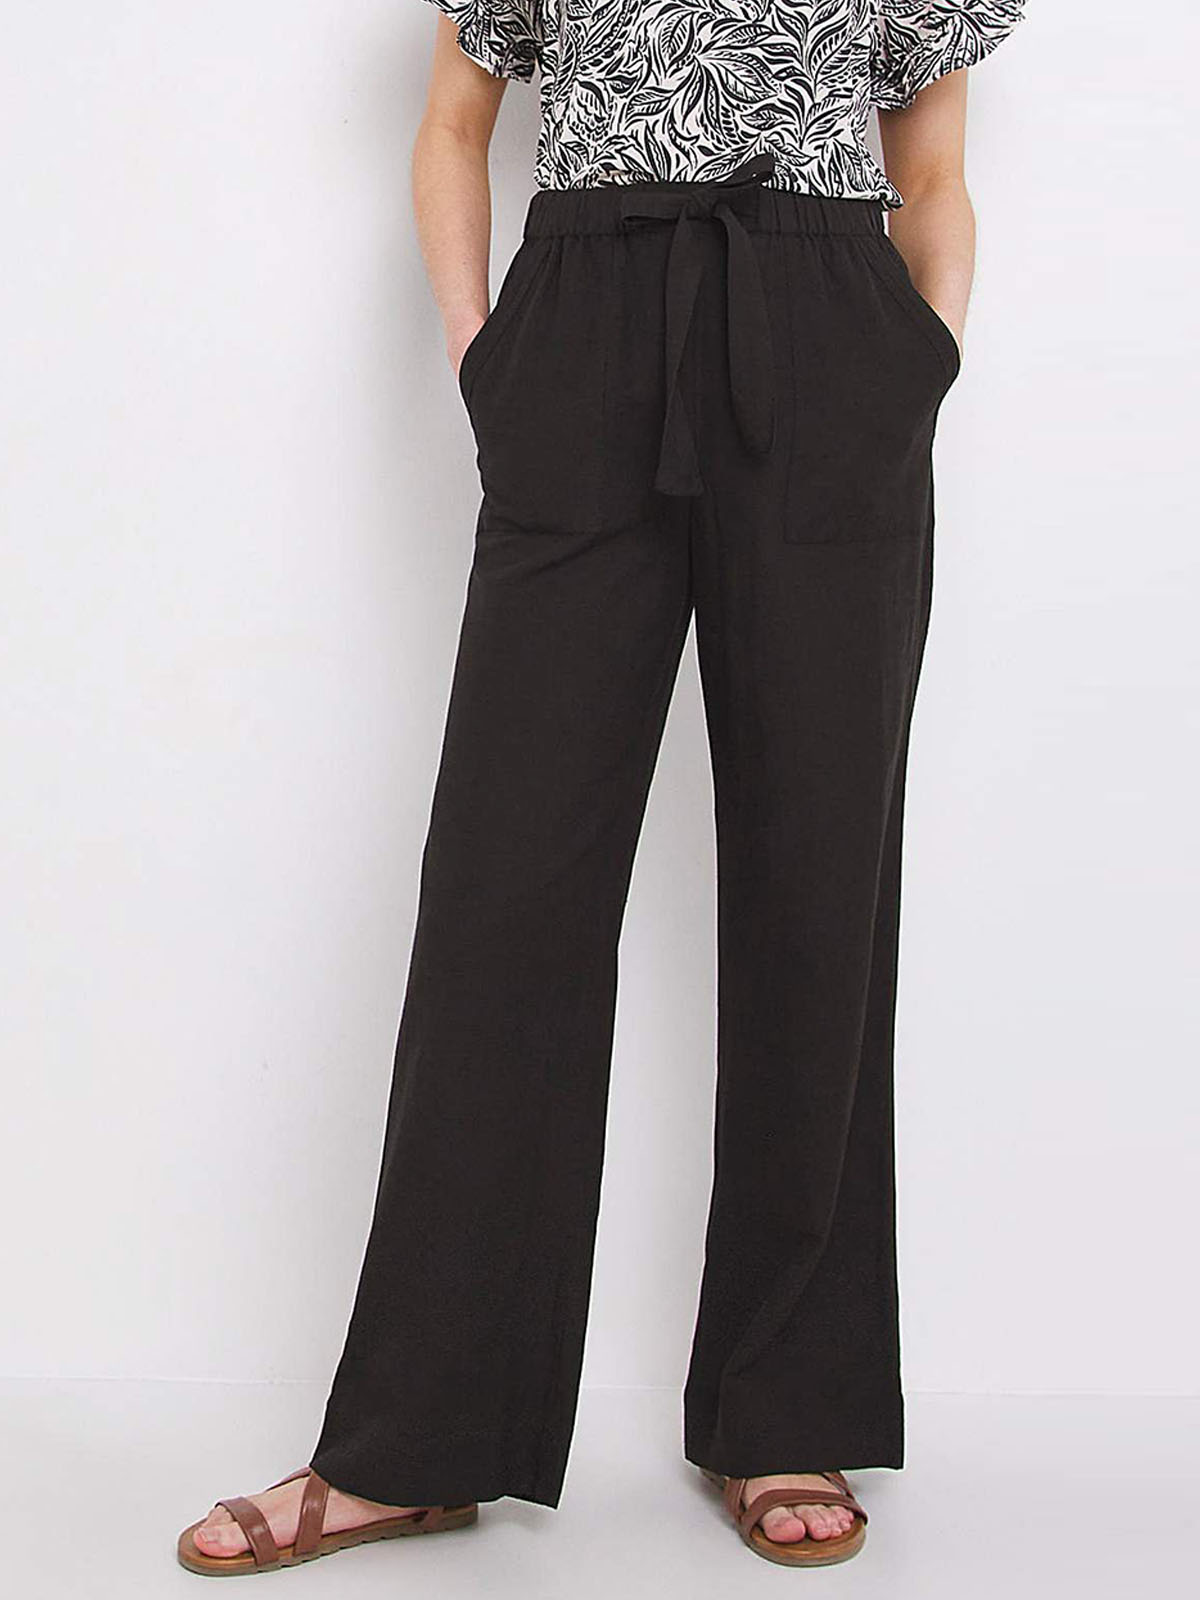 Go Colors Women Solid Linen Mid Rise Pencil Pants  Black Buy Go Colors  Women Solid Linen Mid Rise Pencil Pants  Black Online at Best Price in  India  Nykaa